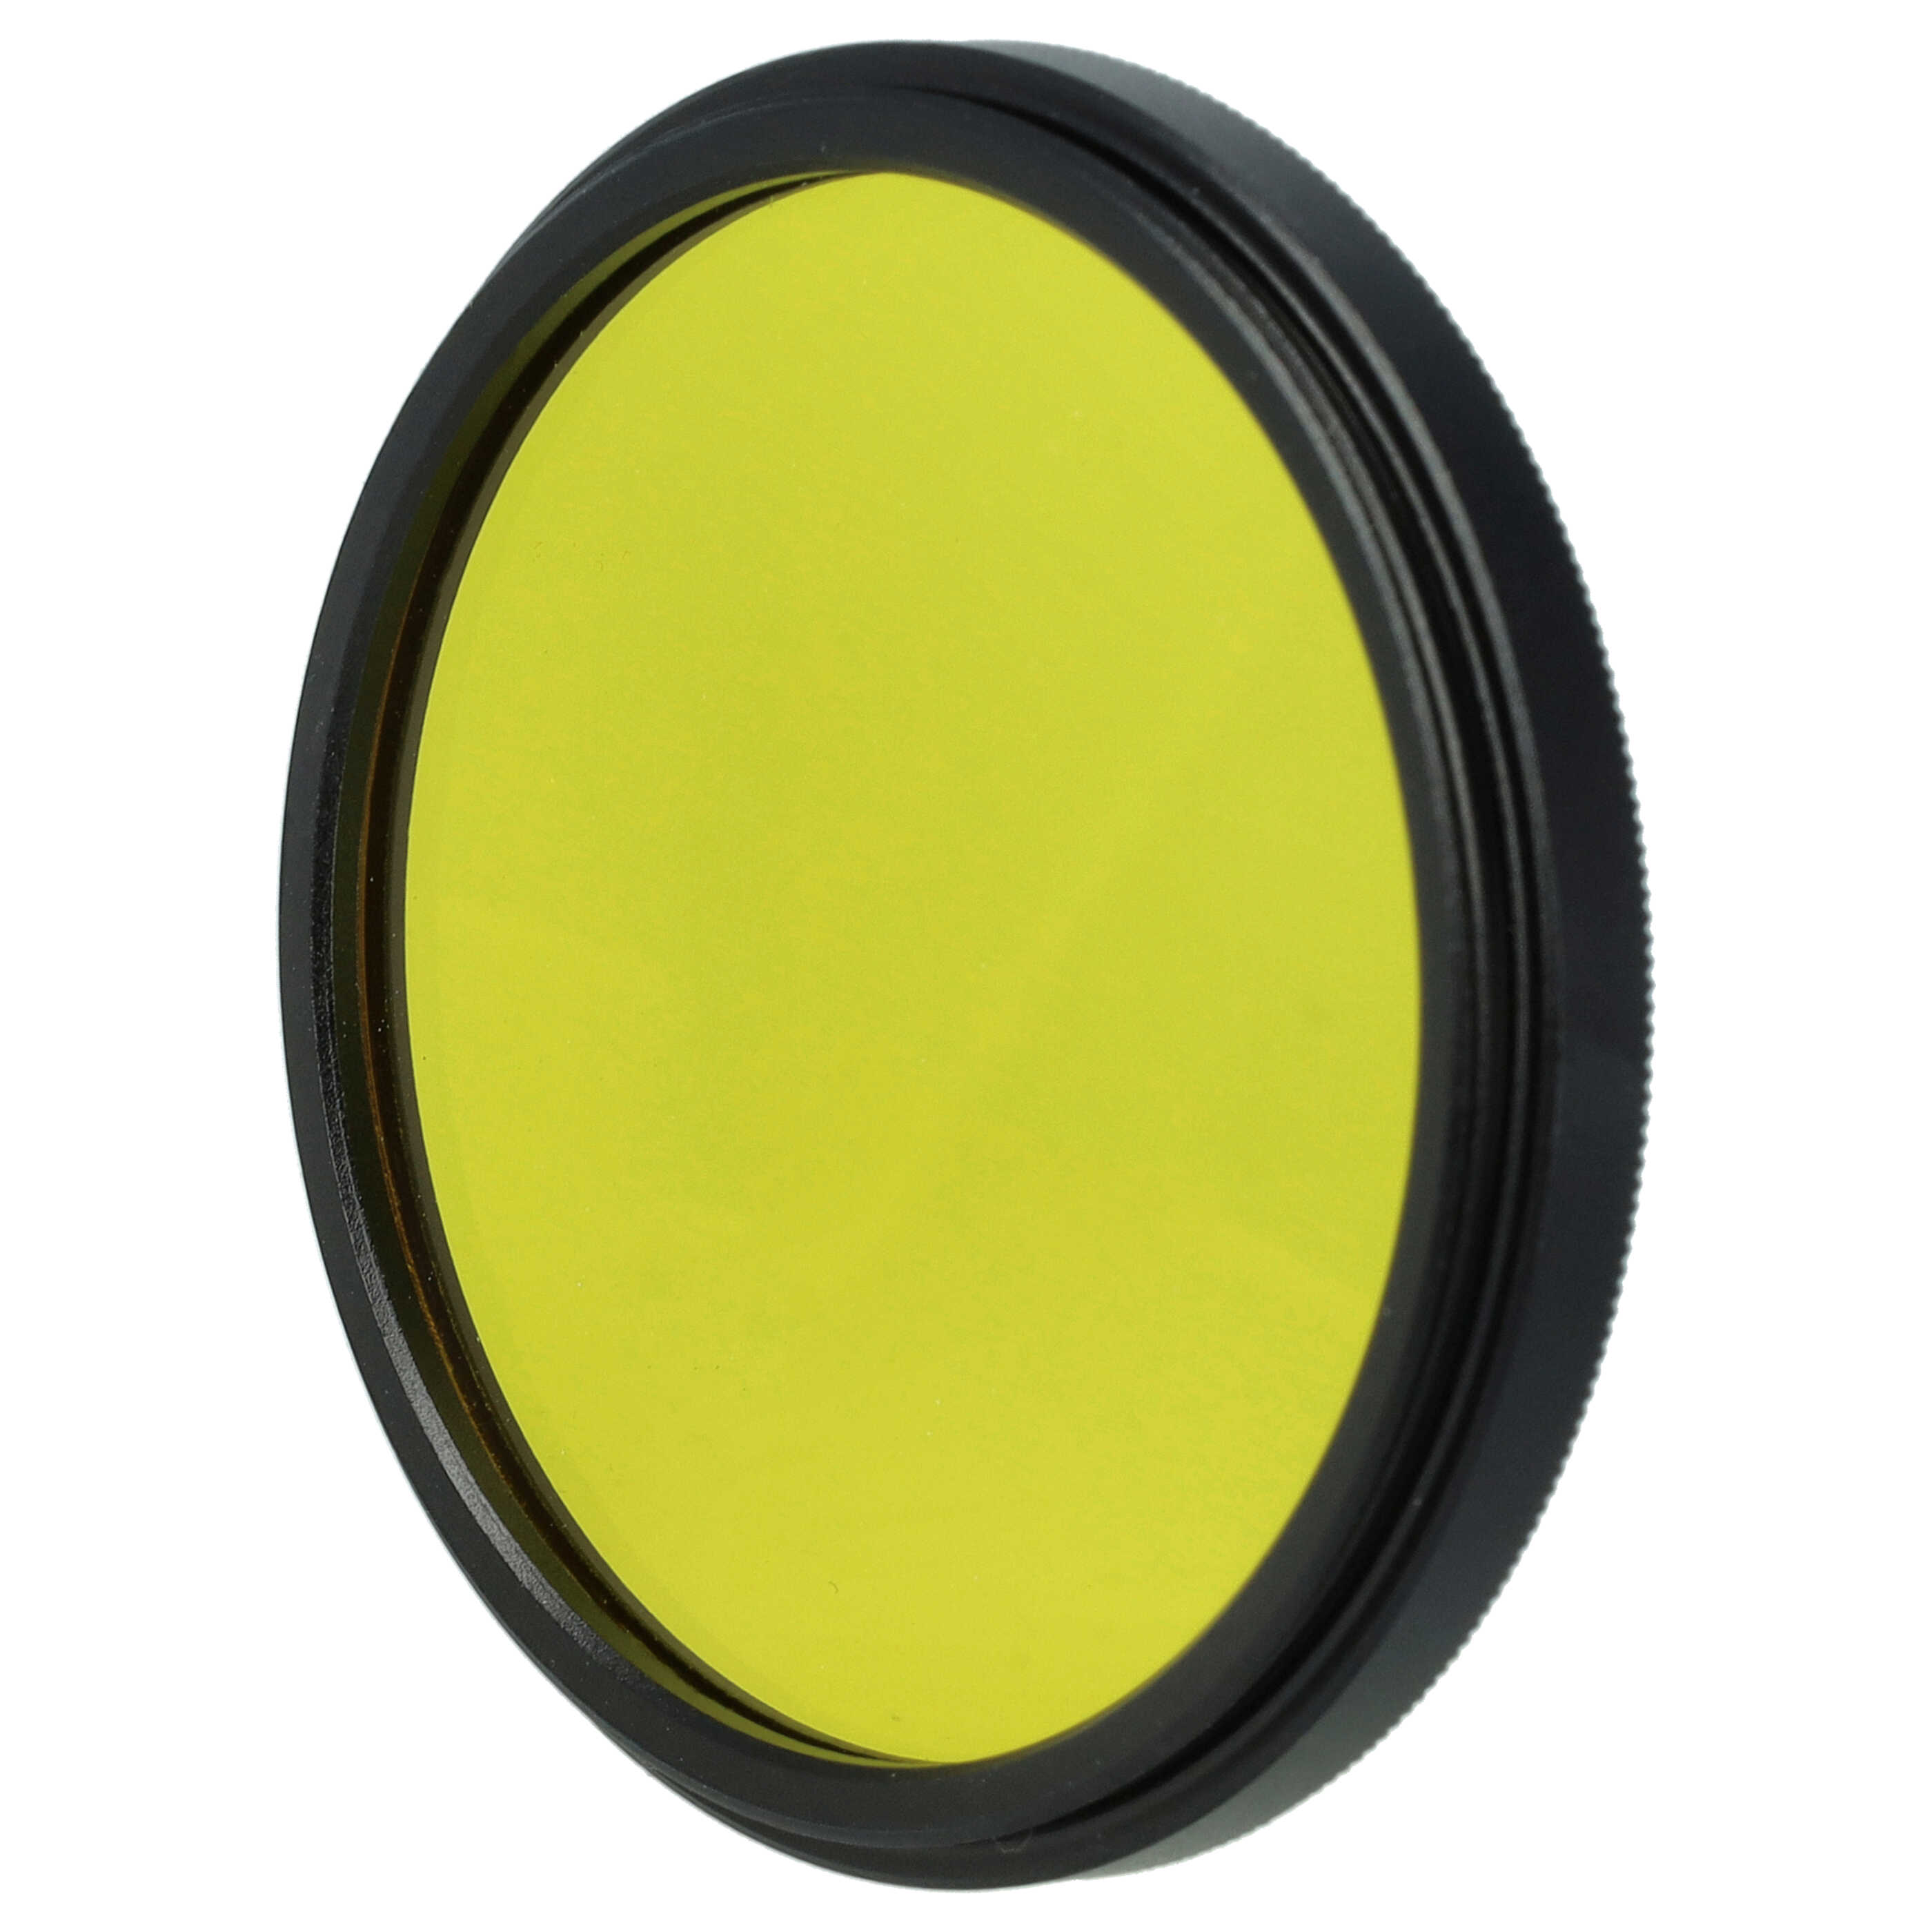 Coloured Filter, Yellow suitable for Camera Lenses with 49 mm Filter Thread - Yellow Filter